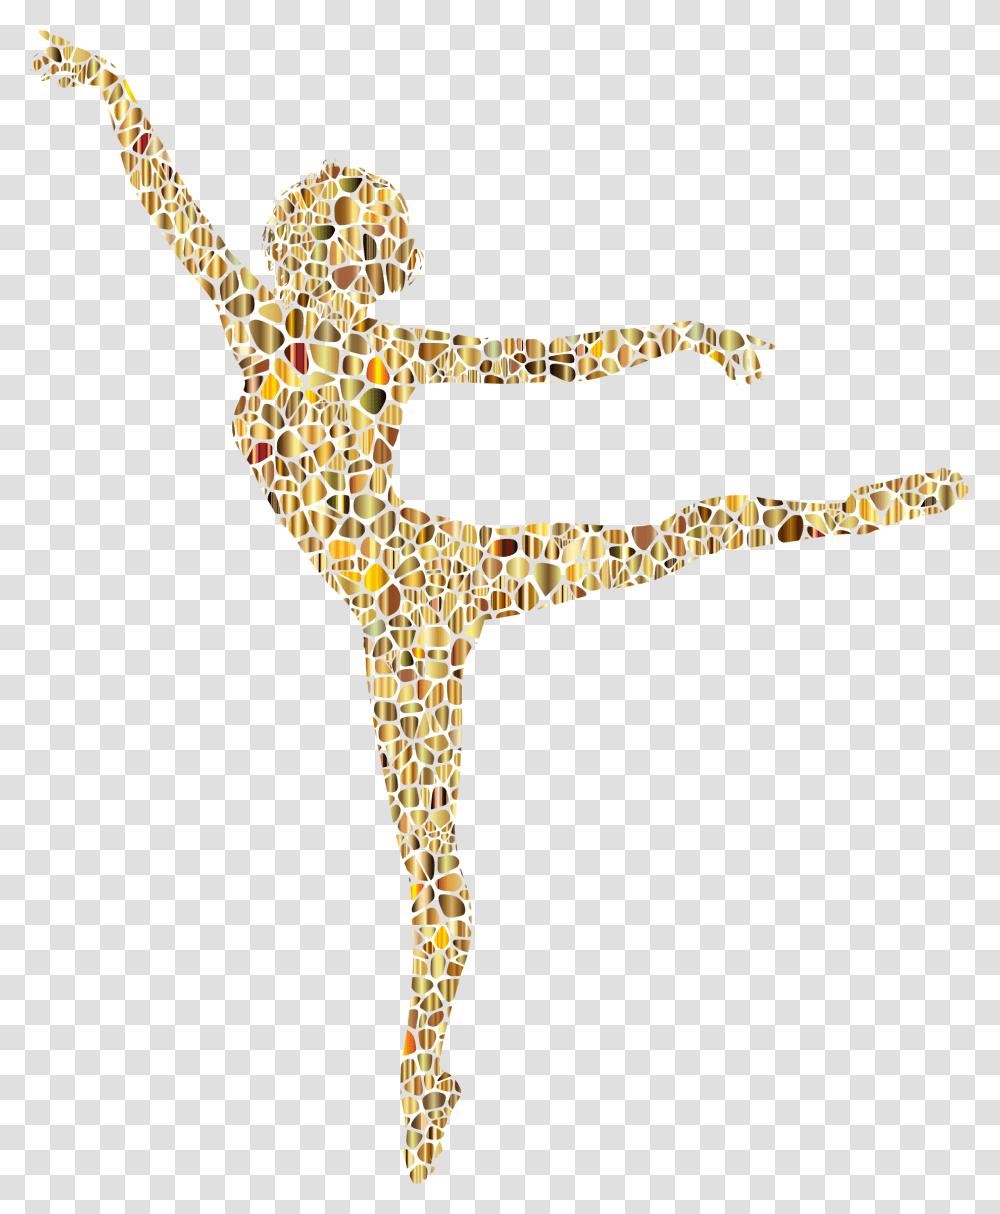 Dancing Couple Silhouette Clip Art Performing Arts No Background, Cross, Dance Pose, Leisure Activities, Crowd Transparent Png